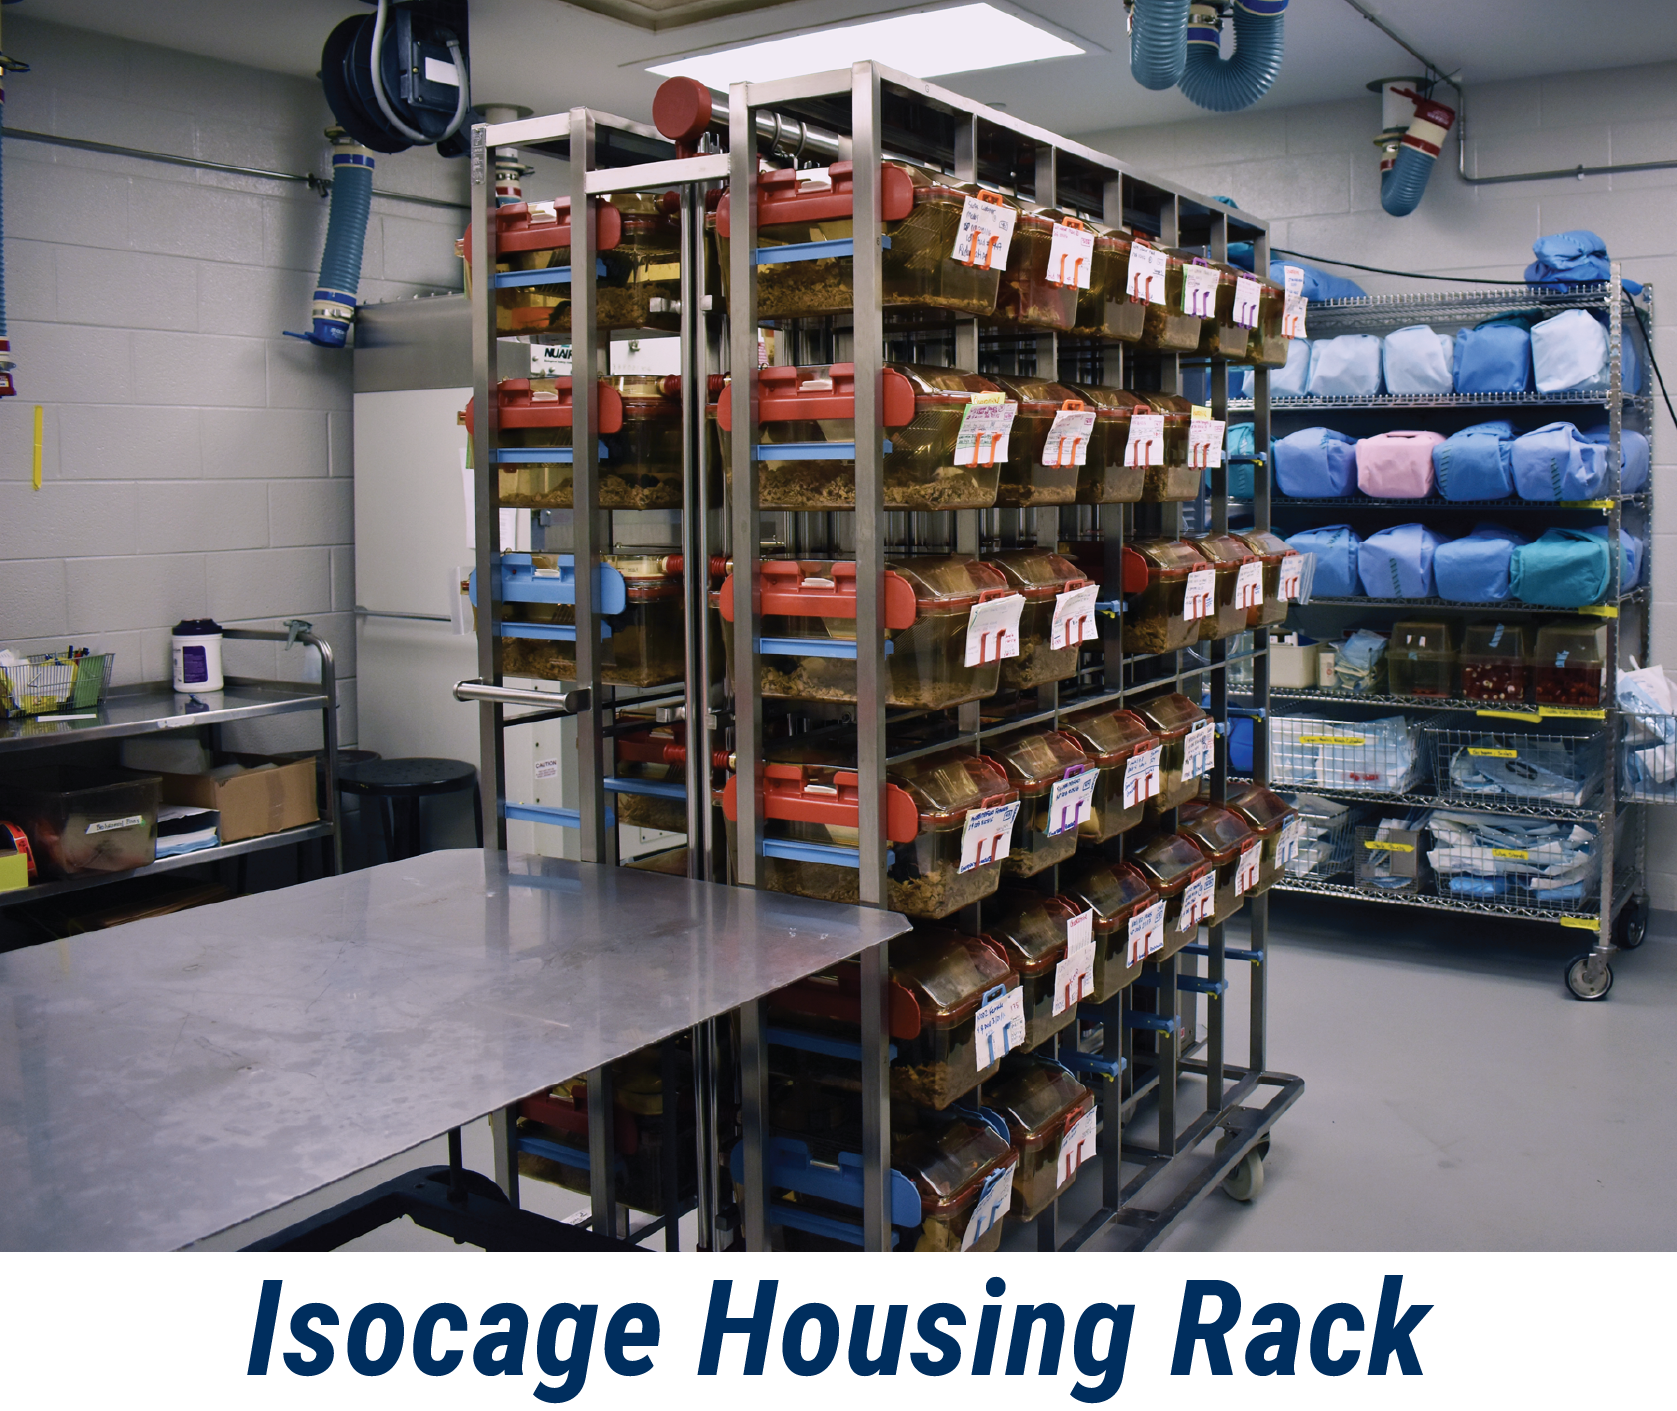 Isocage housing rack in germ-free mouse facility